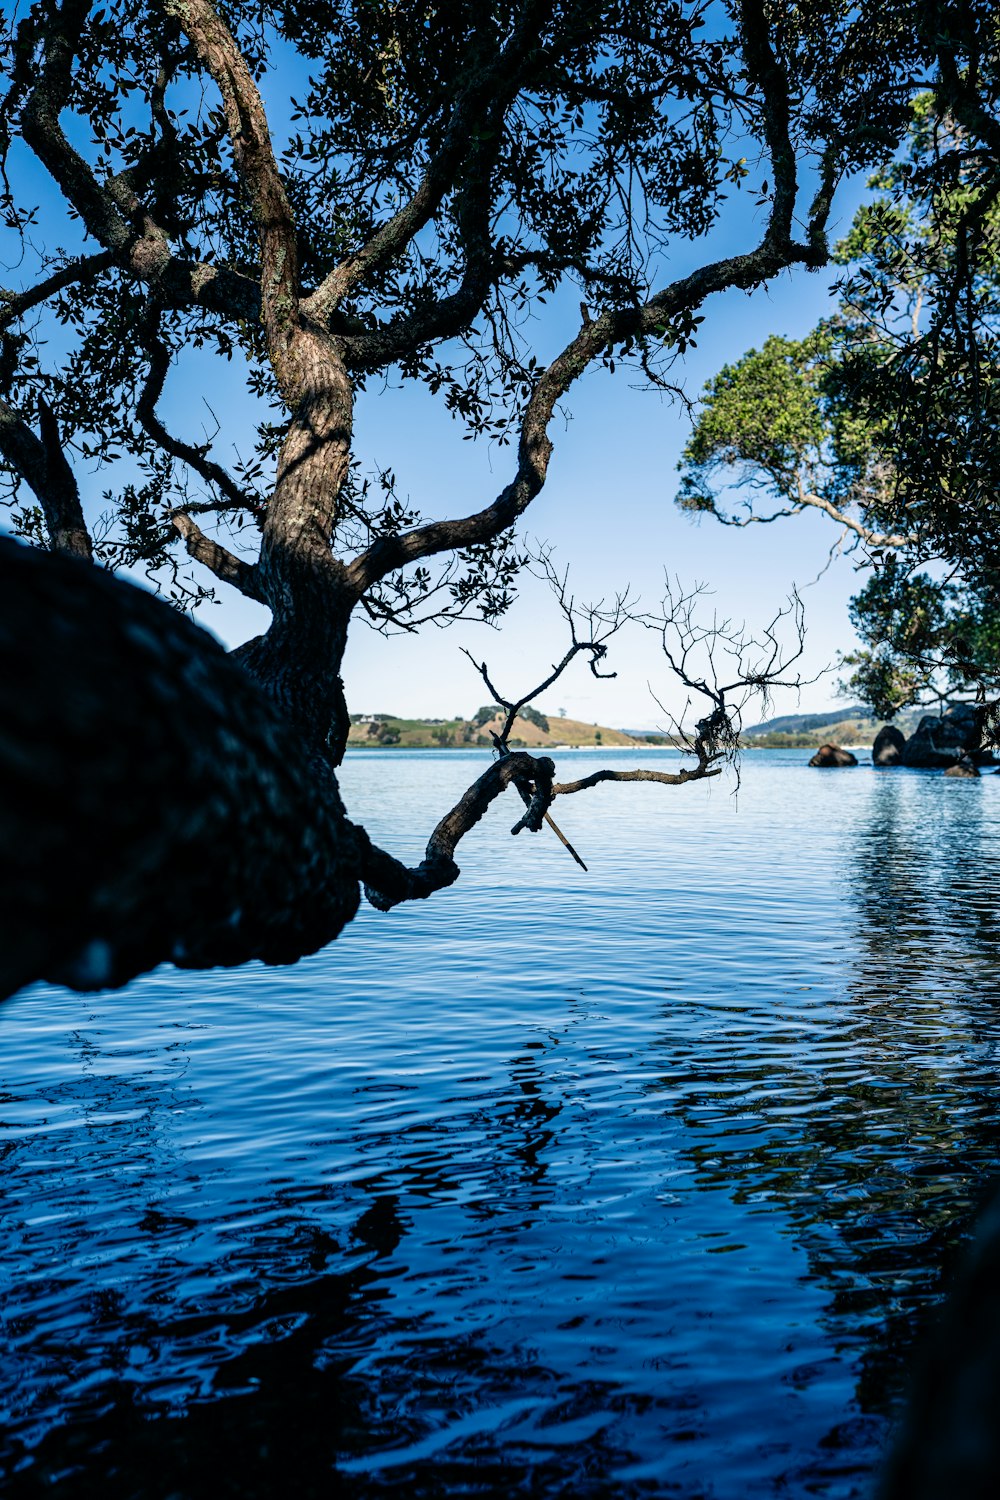 a view of a body of water with a tree in the foreground